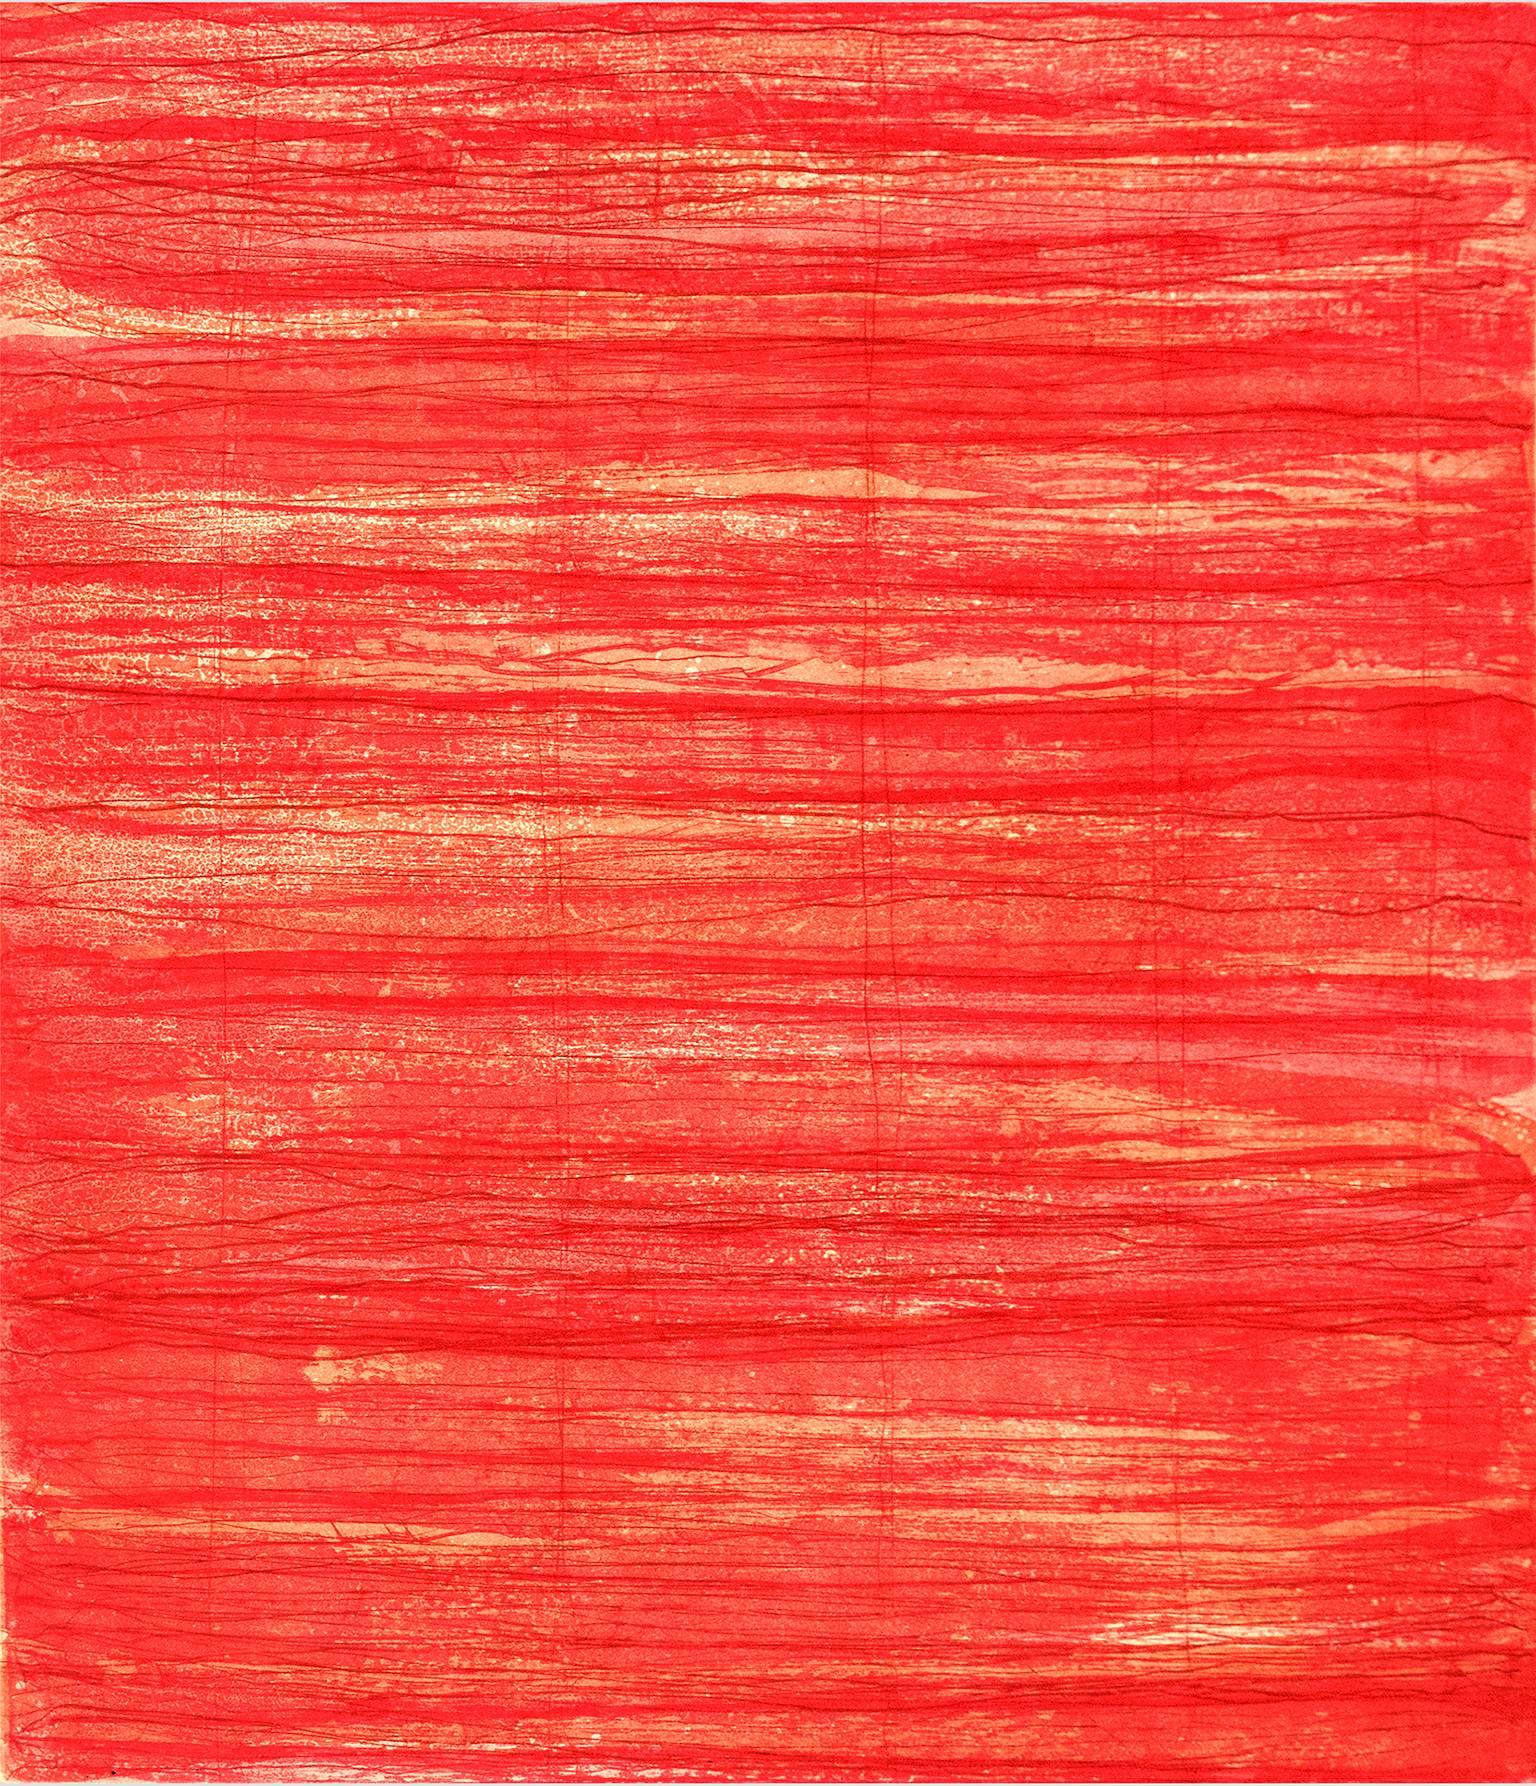 Emily Berger Abstract Print - Bound Brook One, painterly abstract aquatint monoprint, red, orange, vermillion.